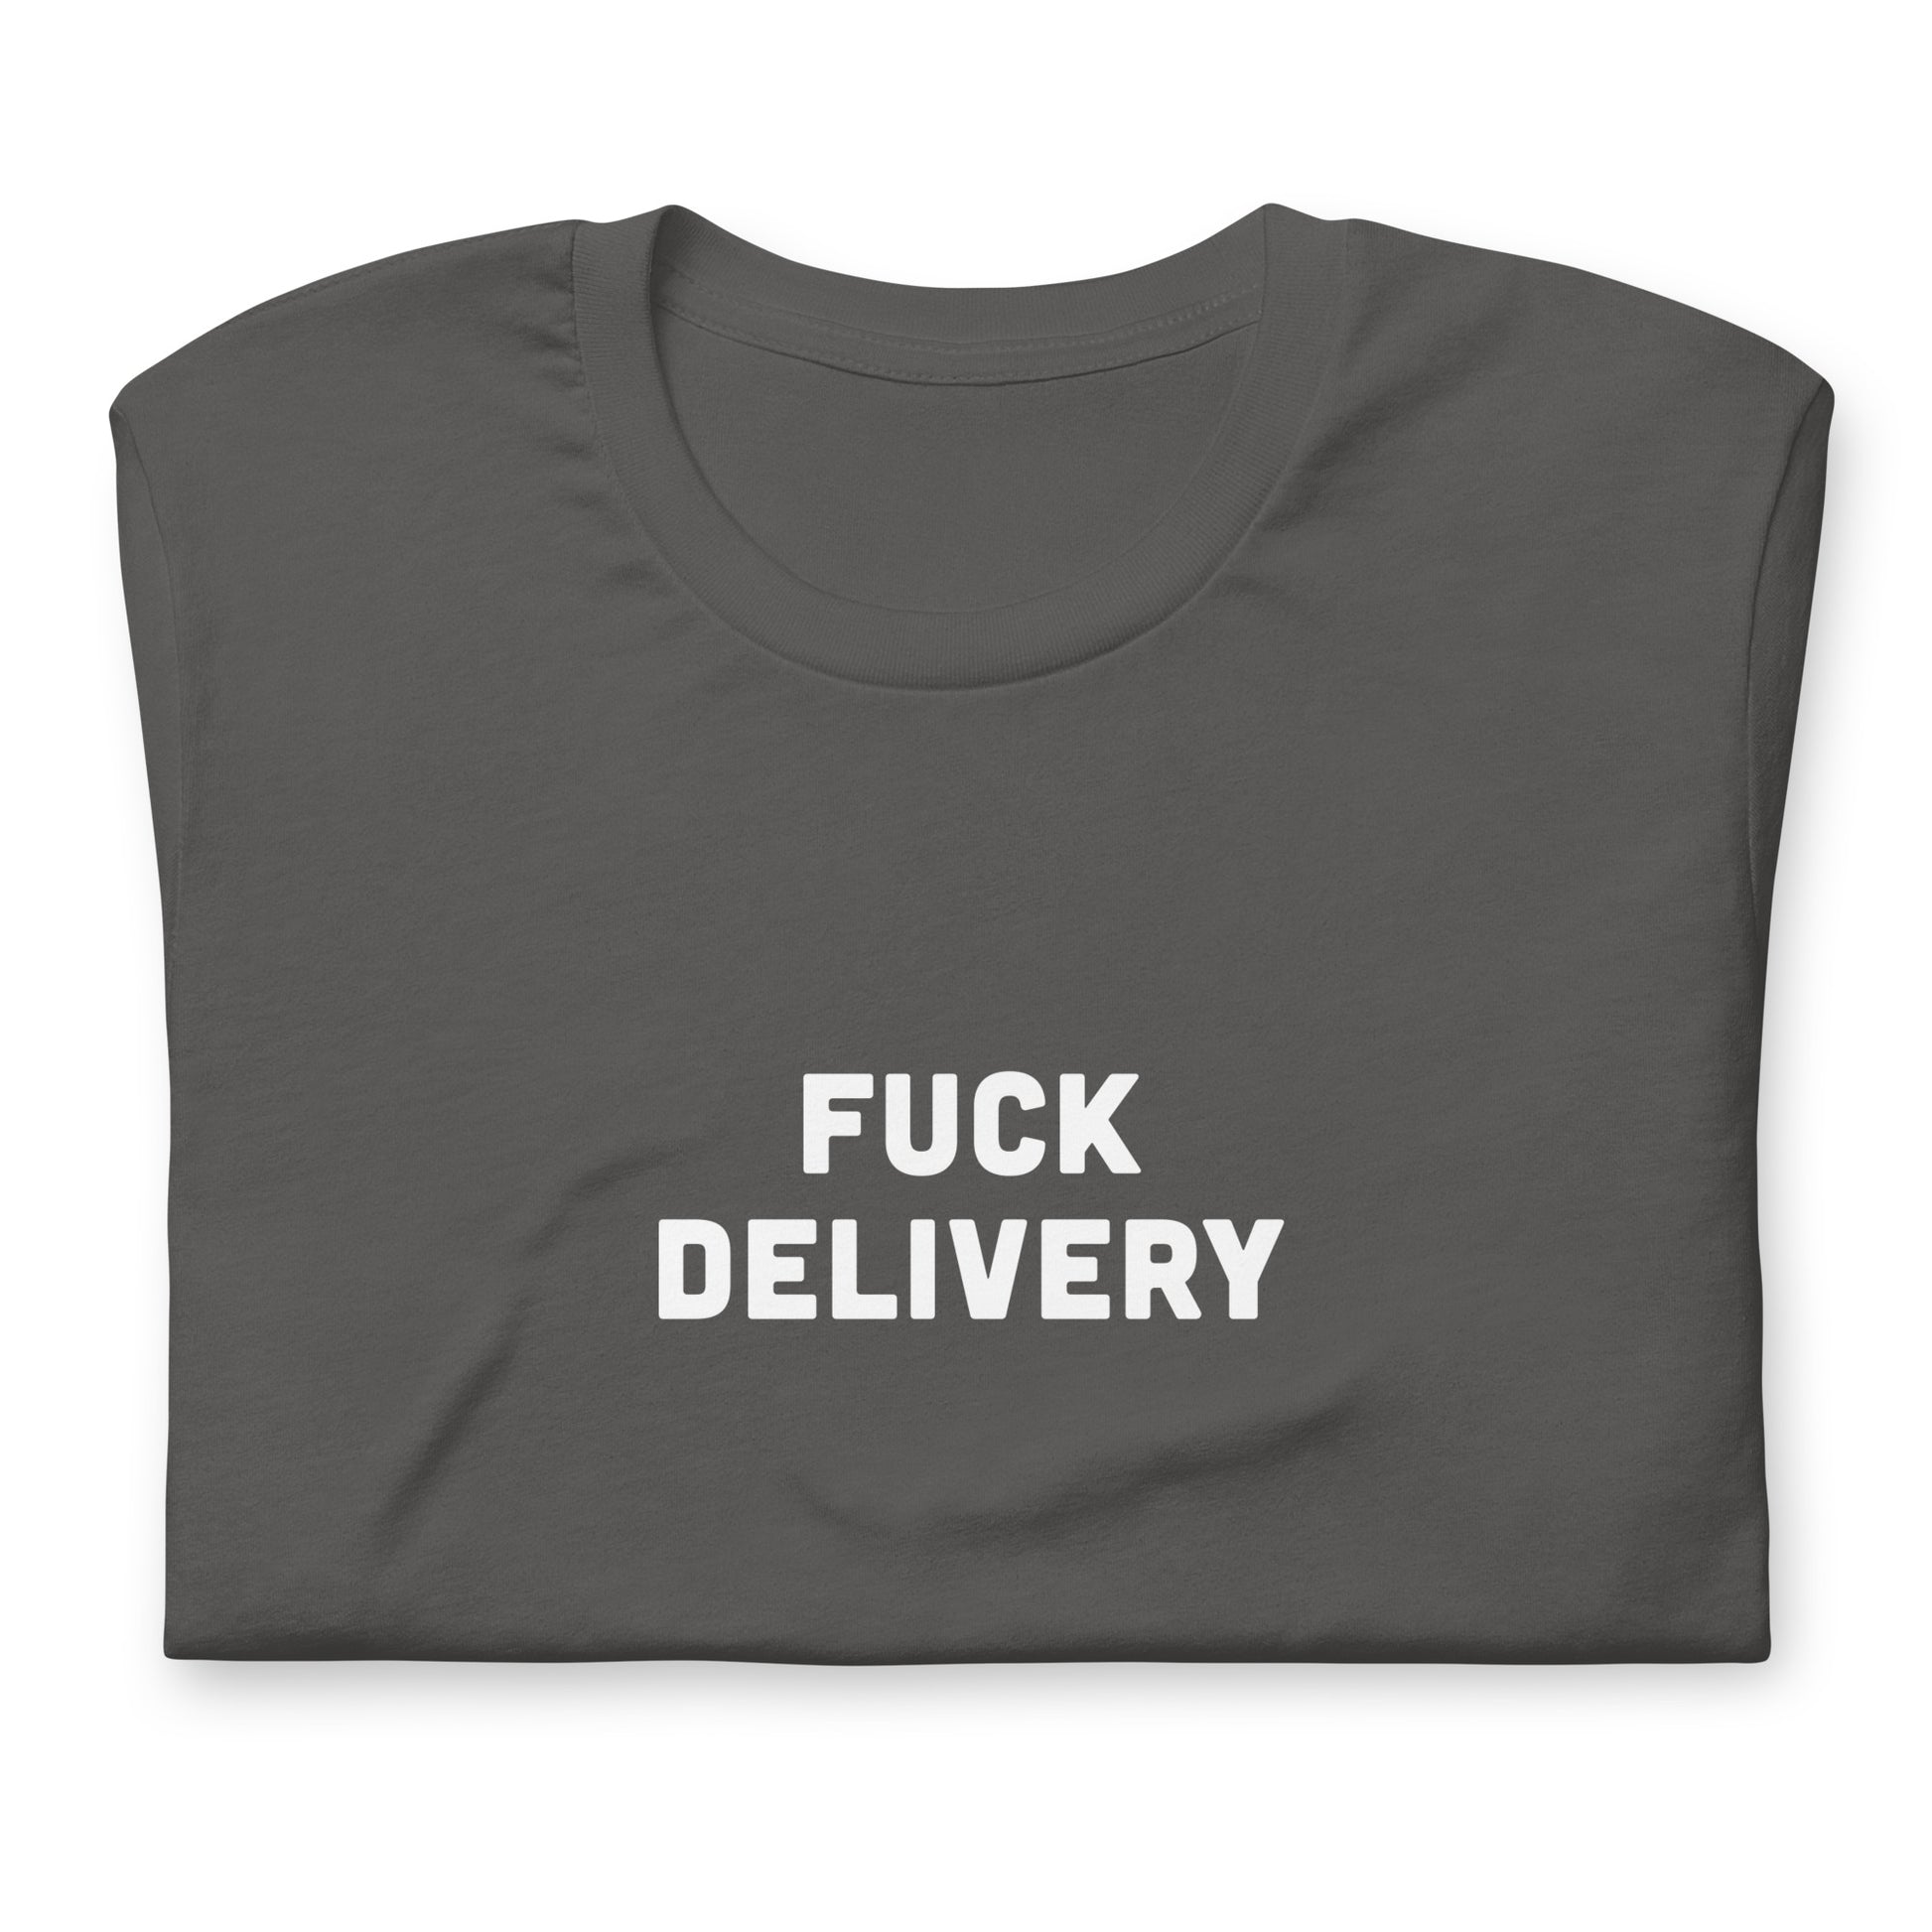 Fuck Delivery T-Shirt Size M Color Navy